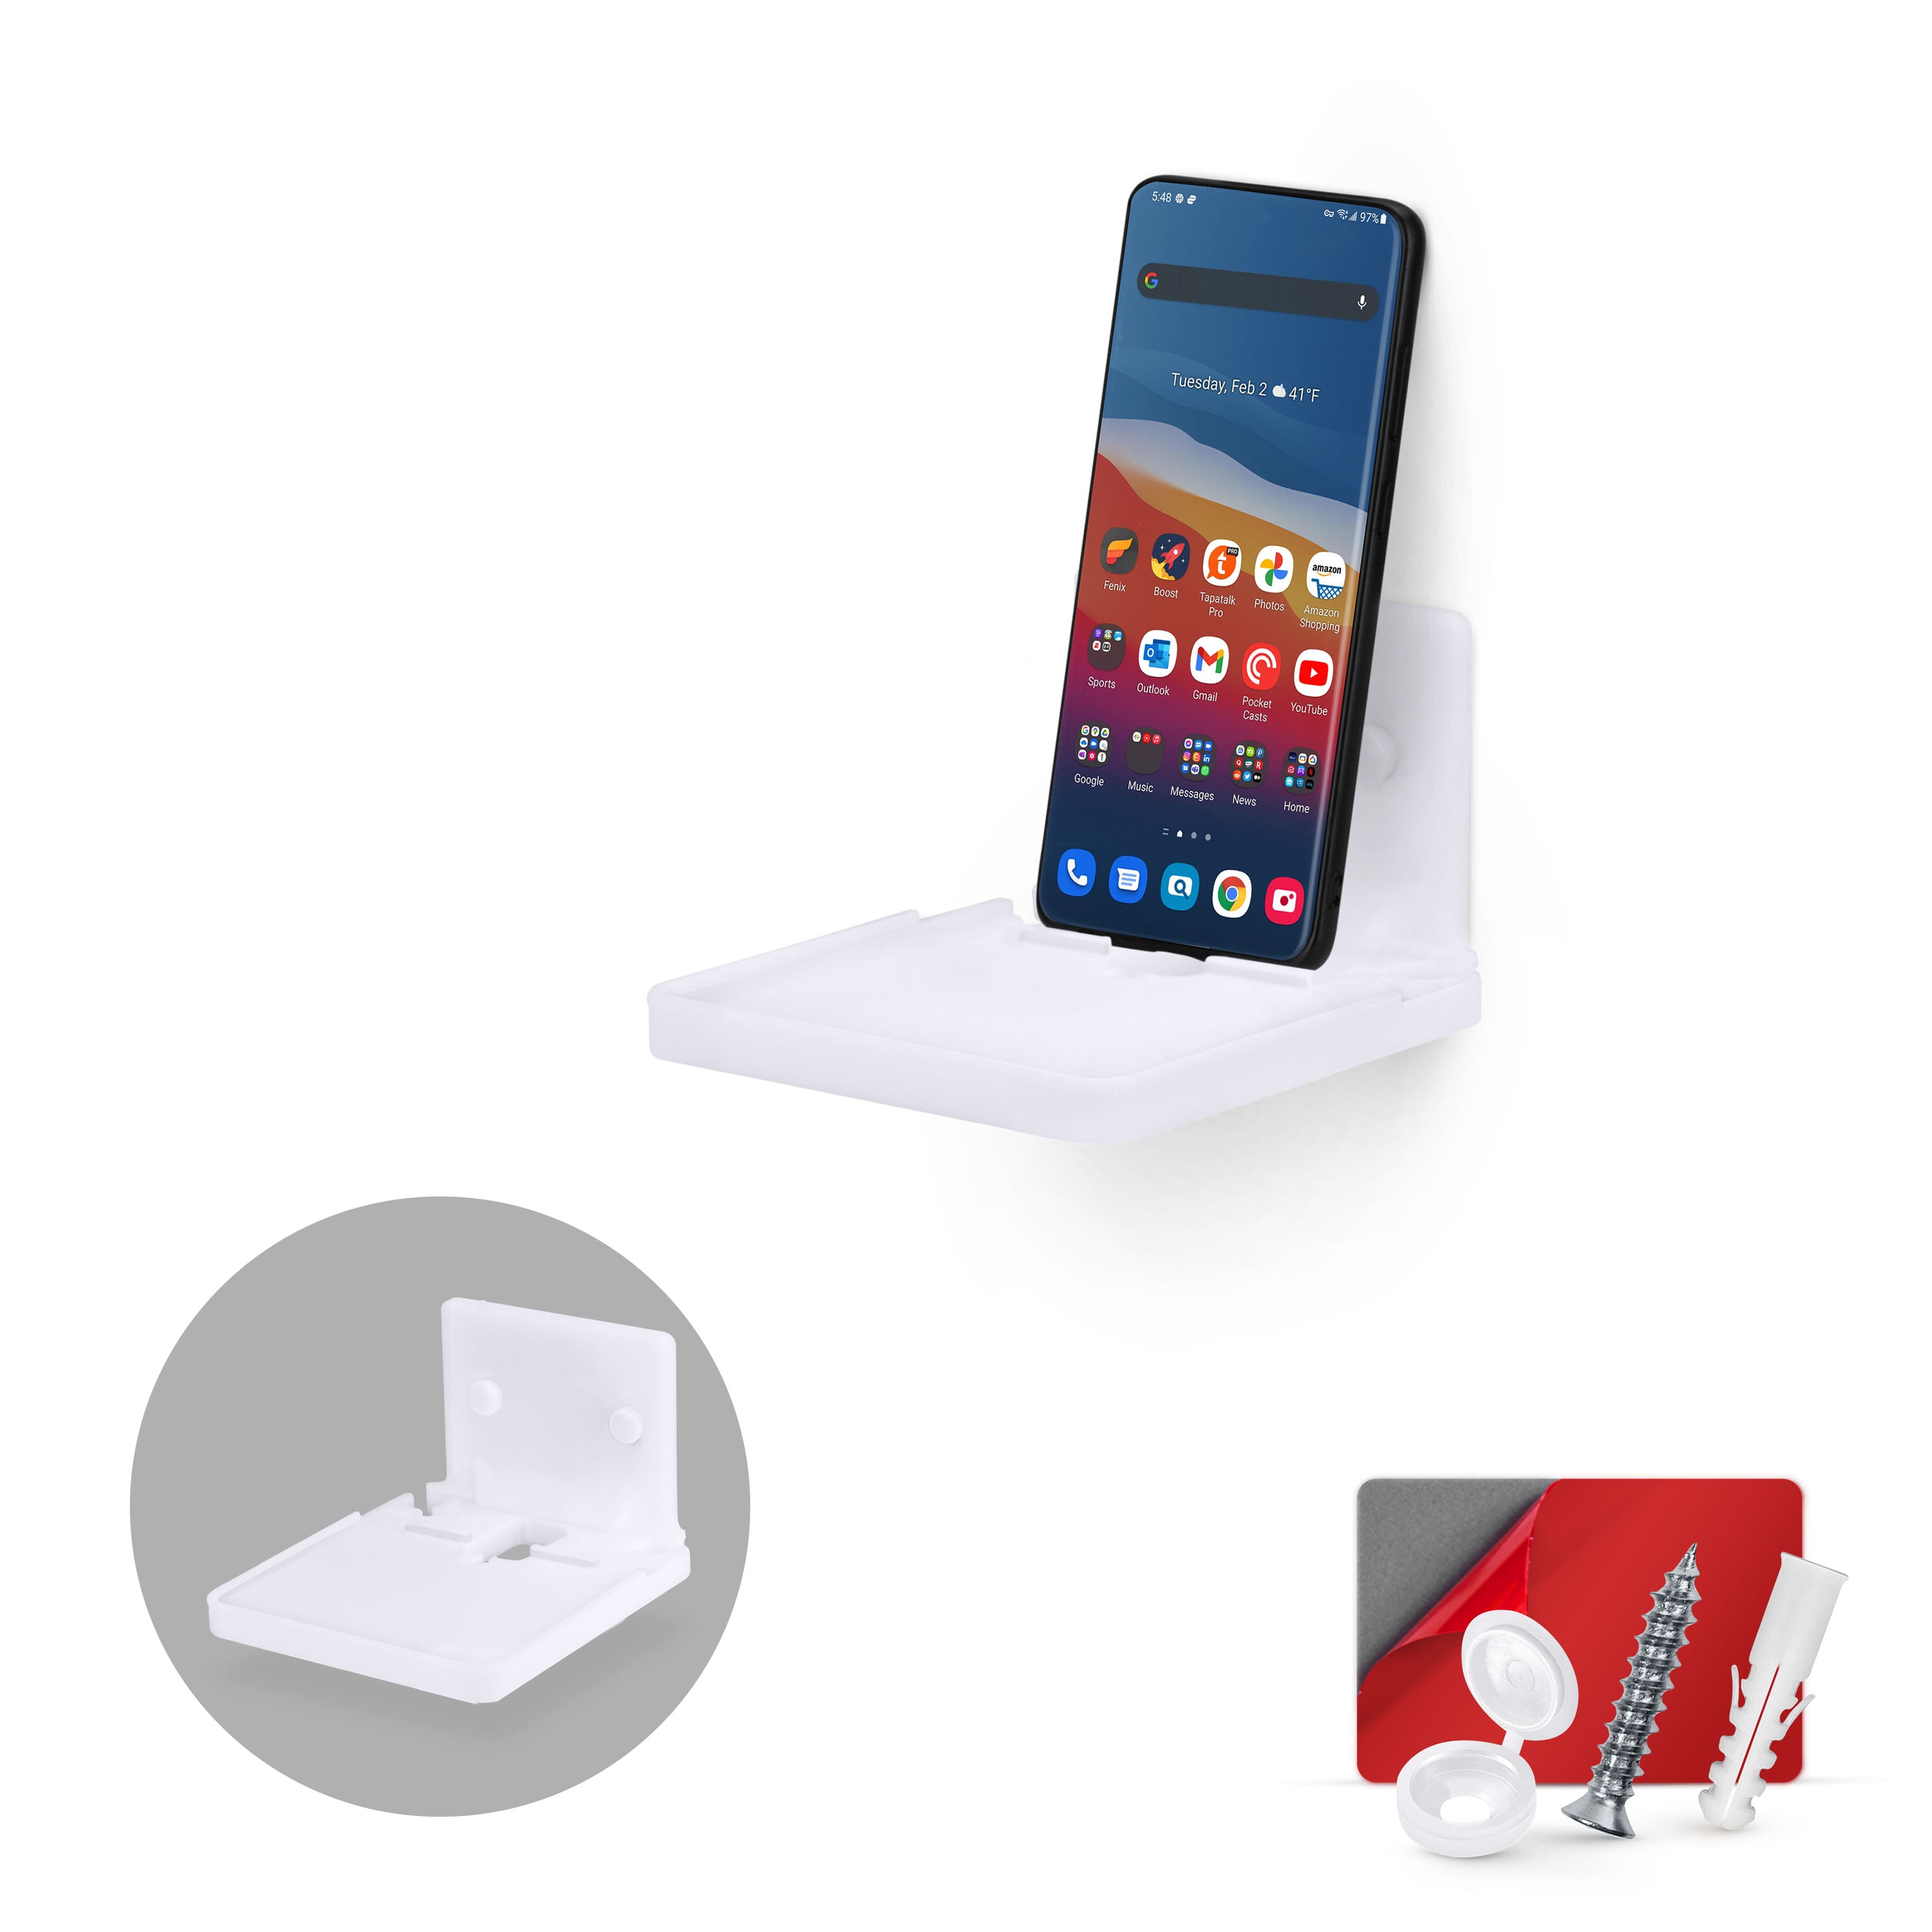 4 Small Wall Mount Shelf with Tablet & Phone Holder, Use for Baby Mon -  Brainwavz Audio